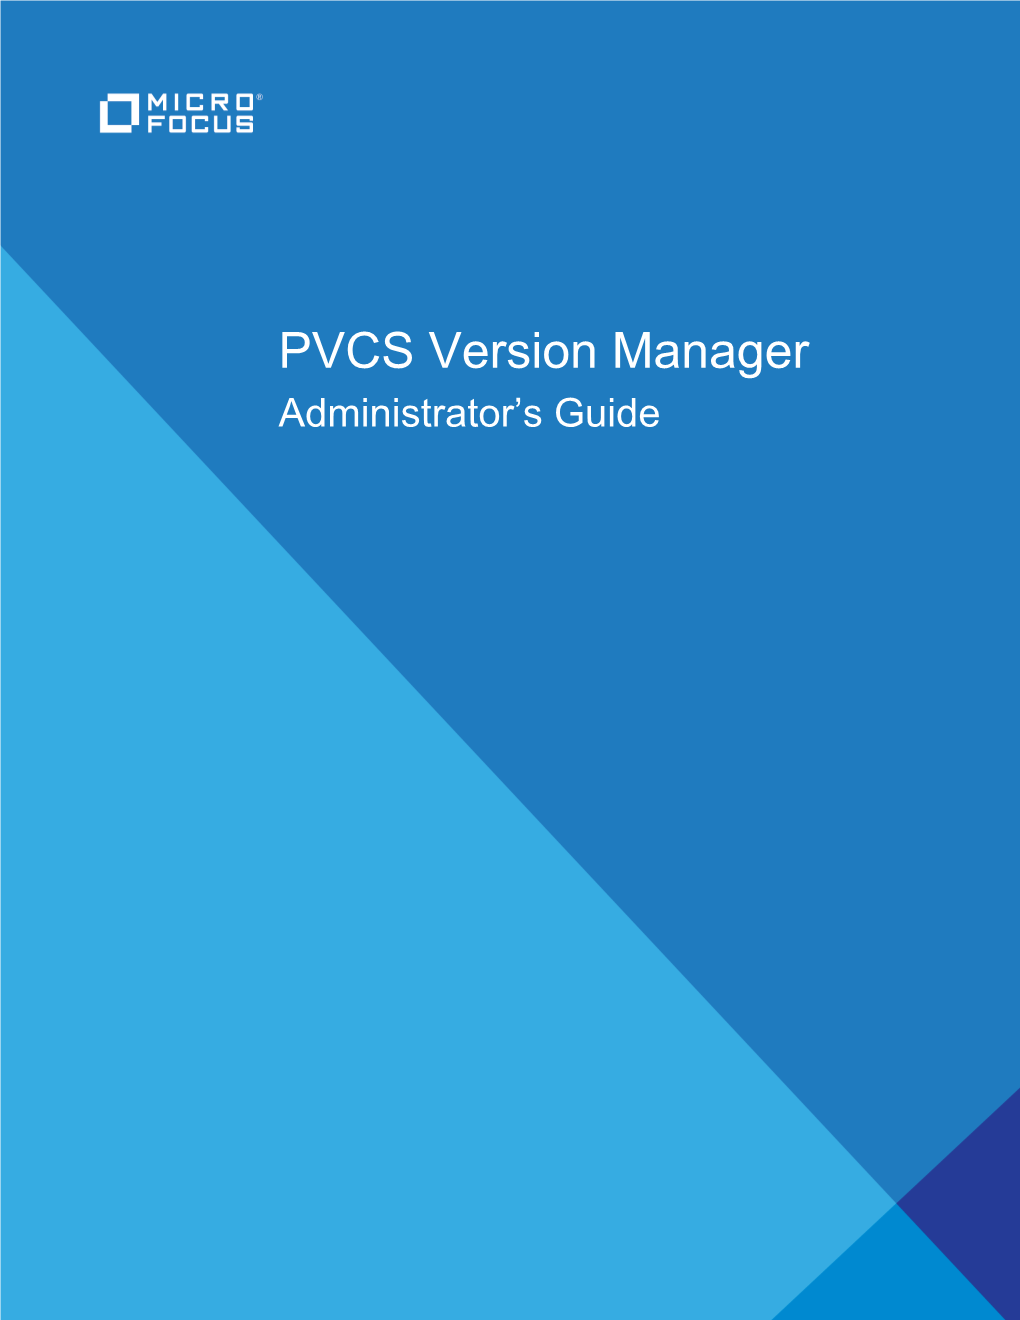 PVCS Version Manager Administrator's Guide